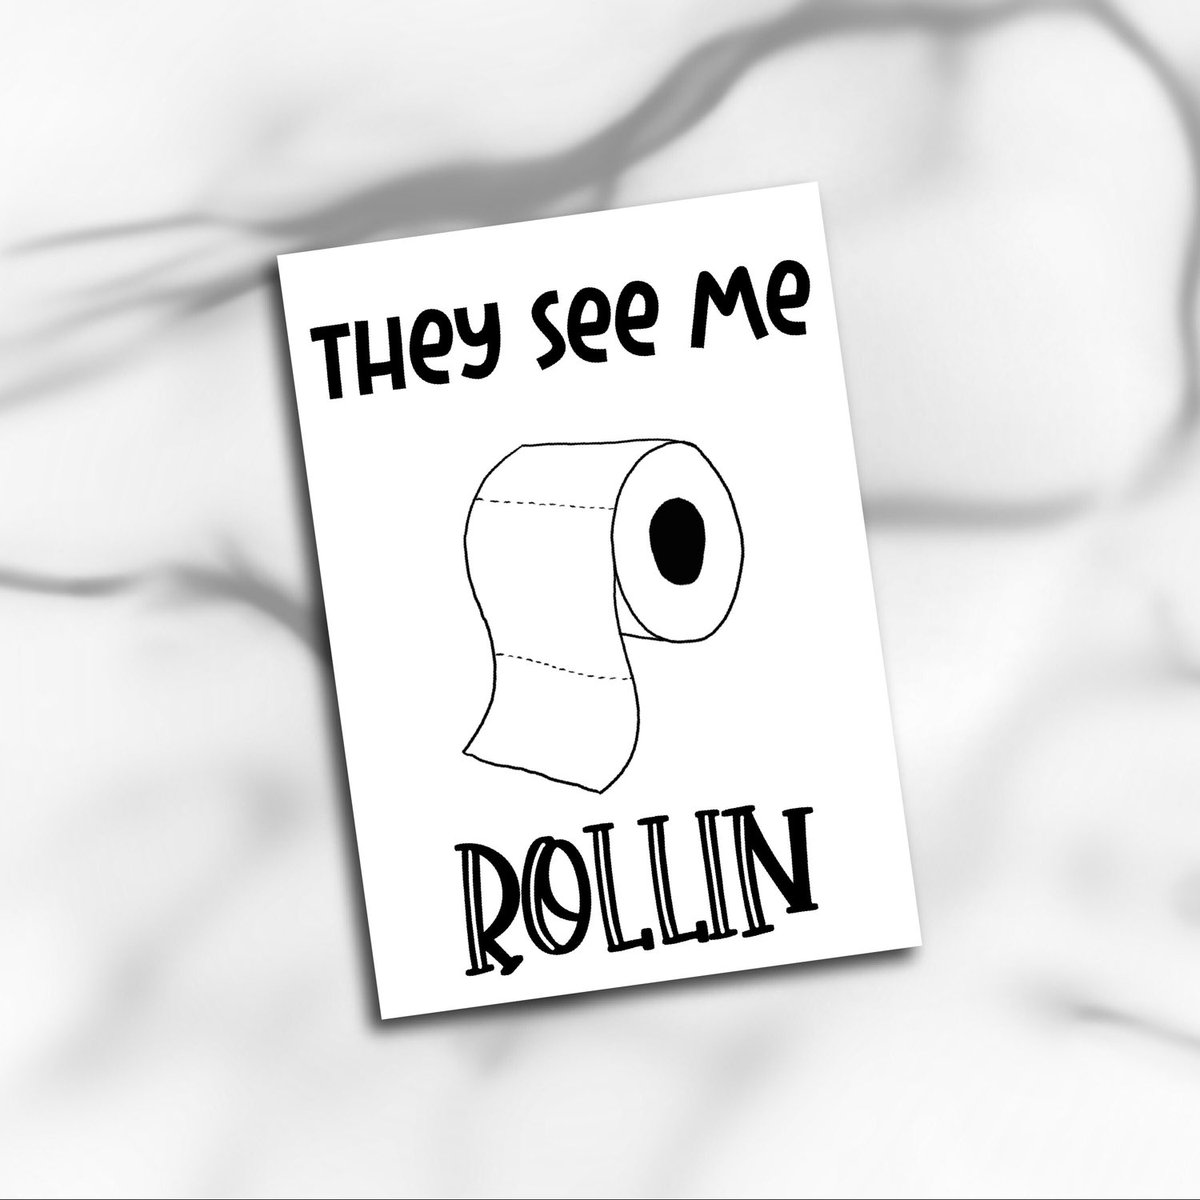 Excited to share this item from my #etsyshop
Bathroom Art Print - They see me Rollin Bathroom A4 size print 
etsy.me/42d3vY8

#earlybiz #mhhsbd #SBS #UKMakers #CraftBizParty #SmartSocial #etsyme #shopindie